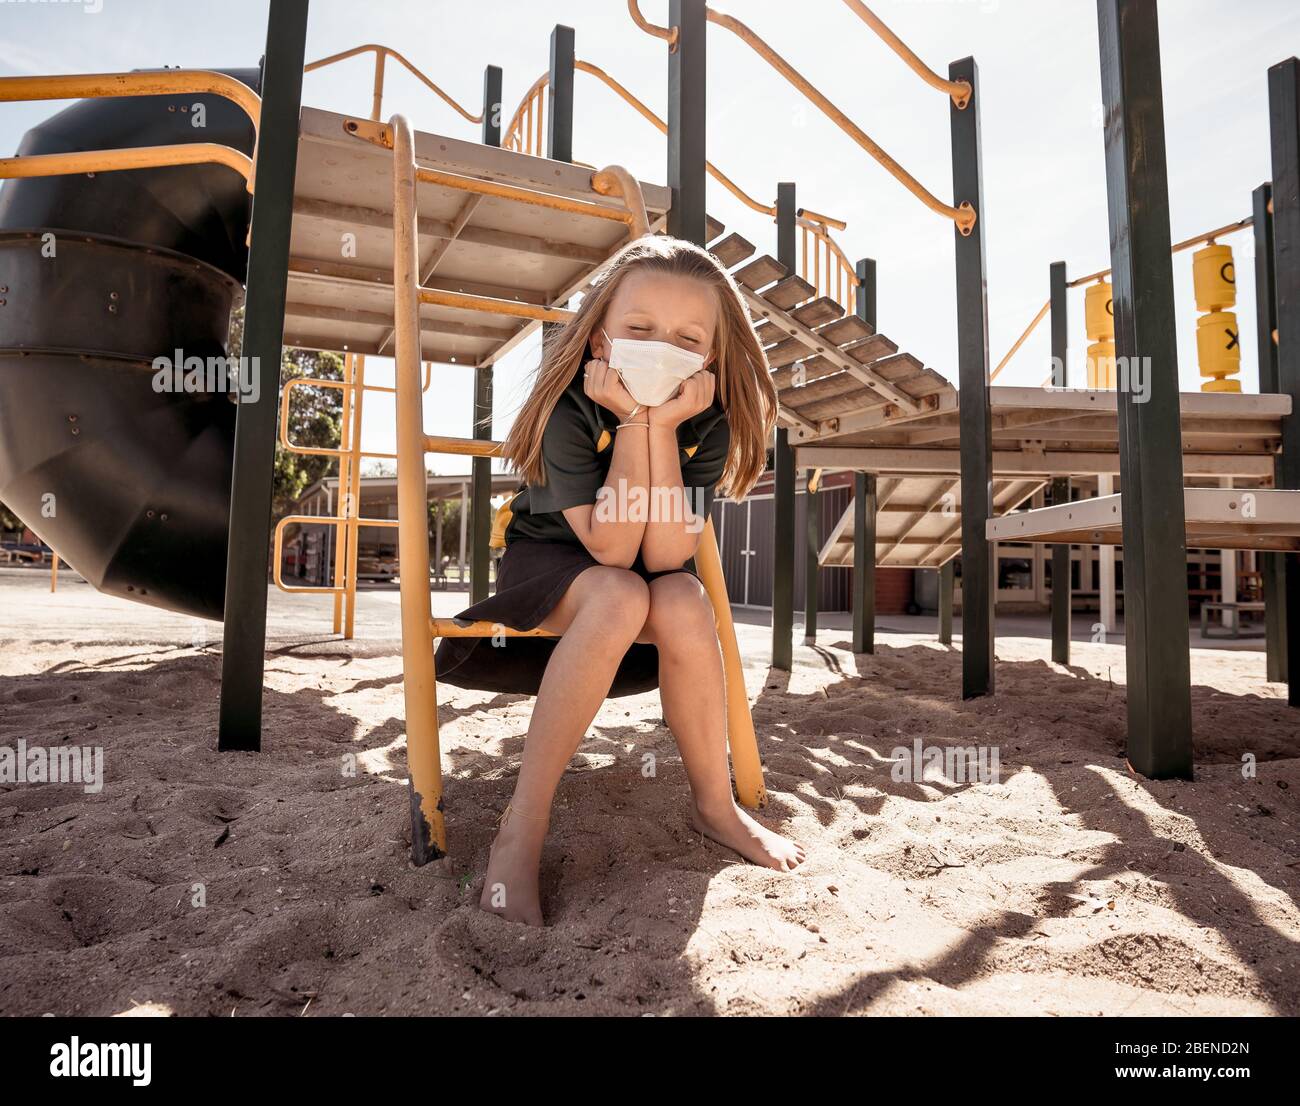 Covid-19 outbreak schools closures. Sad Schoolgirl with face mask bored feeling depressed and lonely in empty playground as school is closed. Restrict Stock Photo